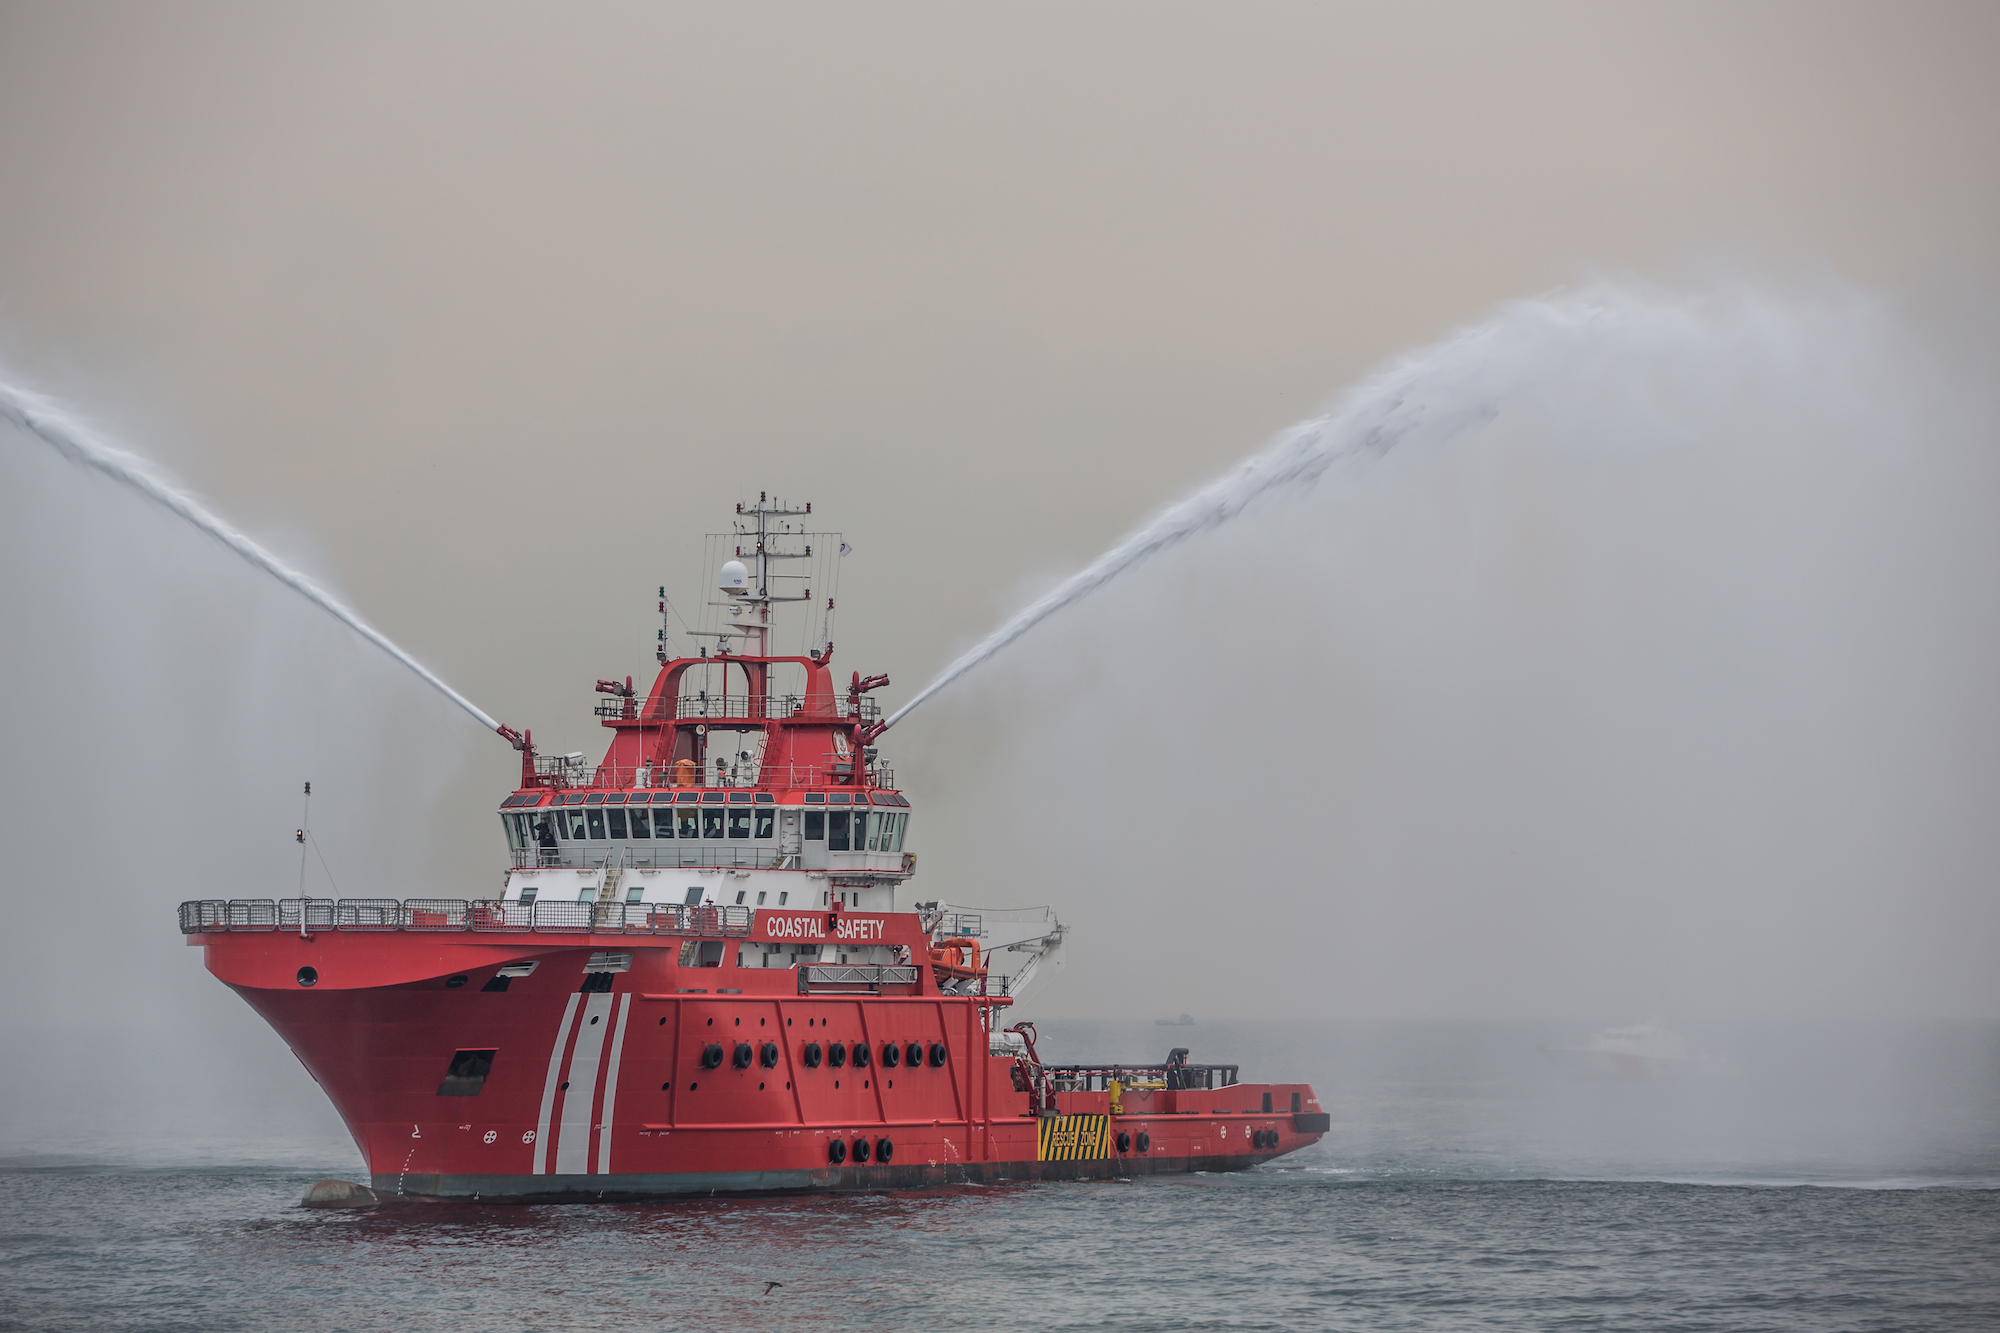 Three new fireboats proposed to tackle offshore blazes